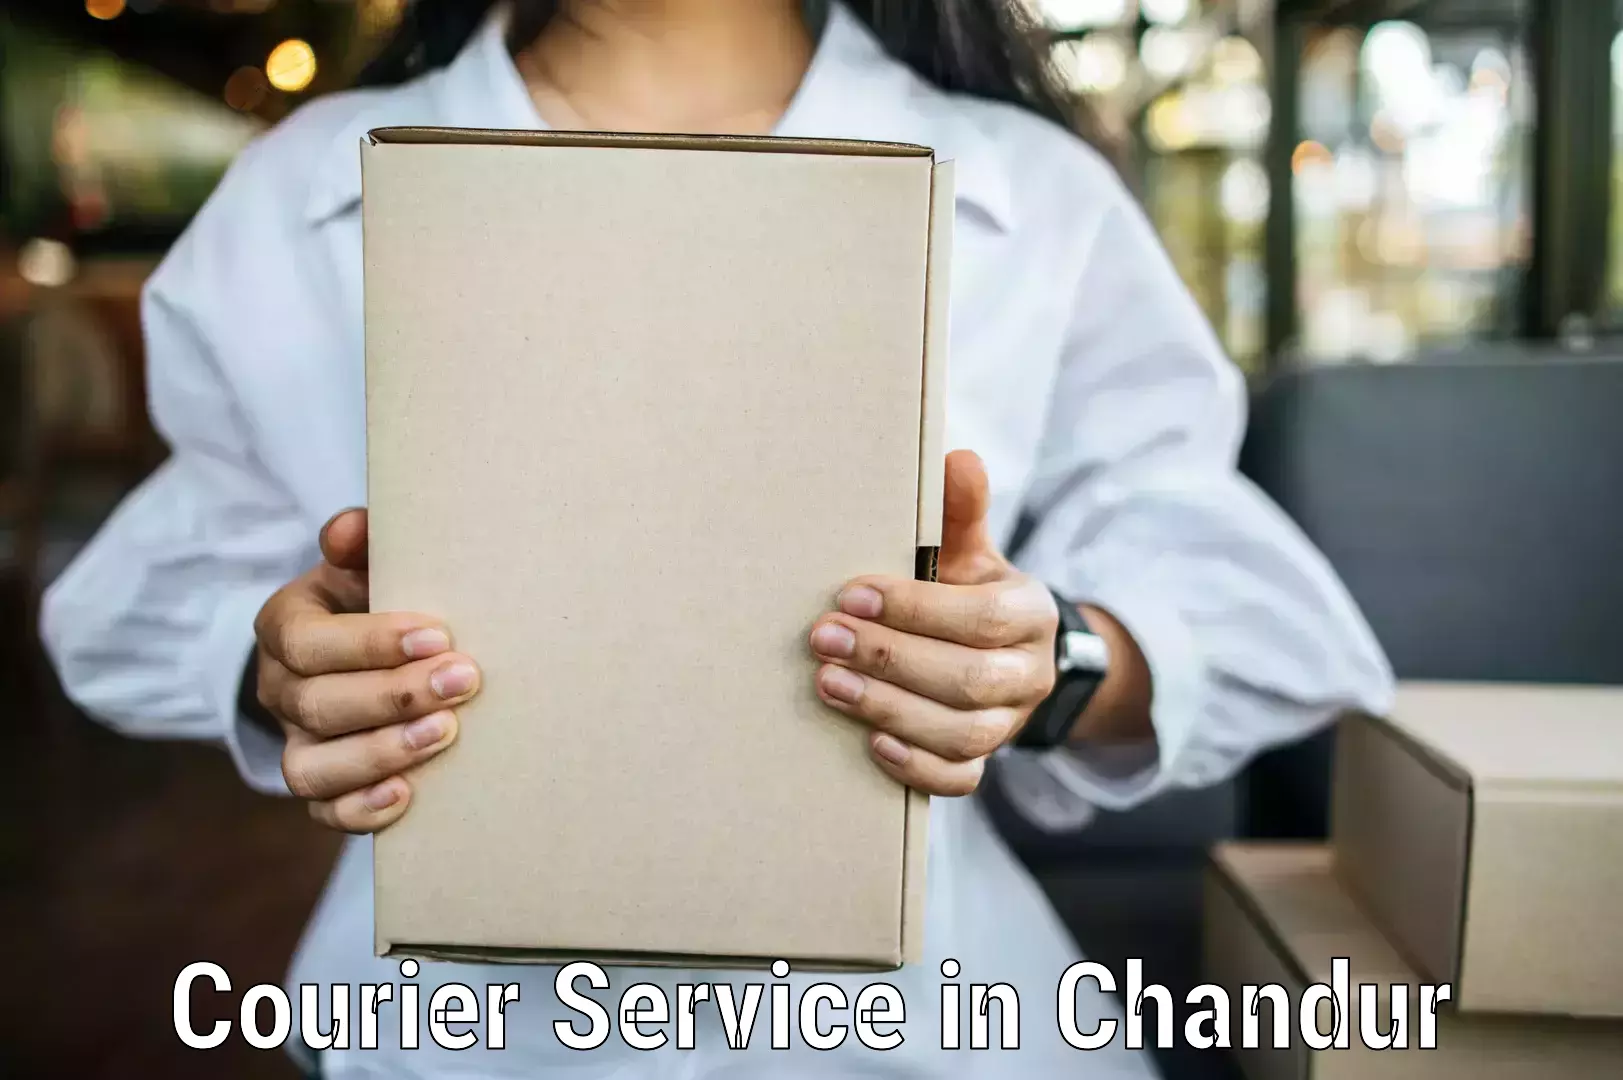 Business delivery service in Chandur